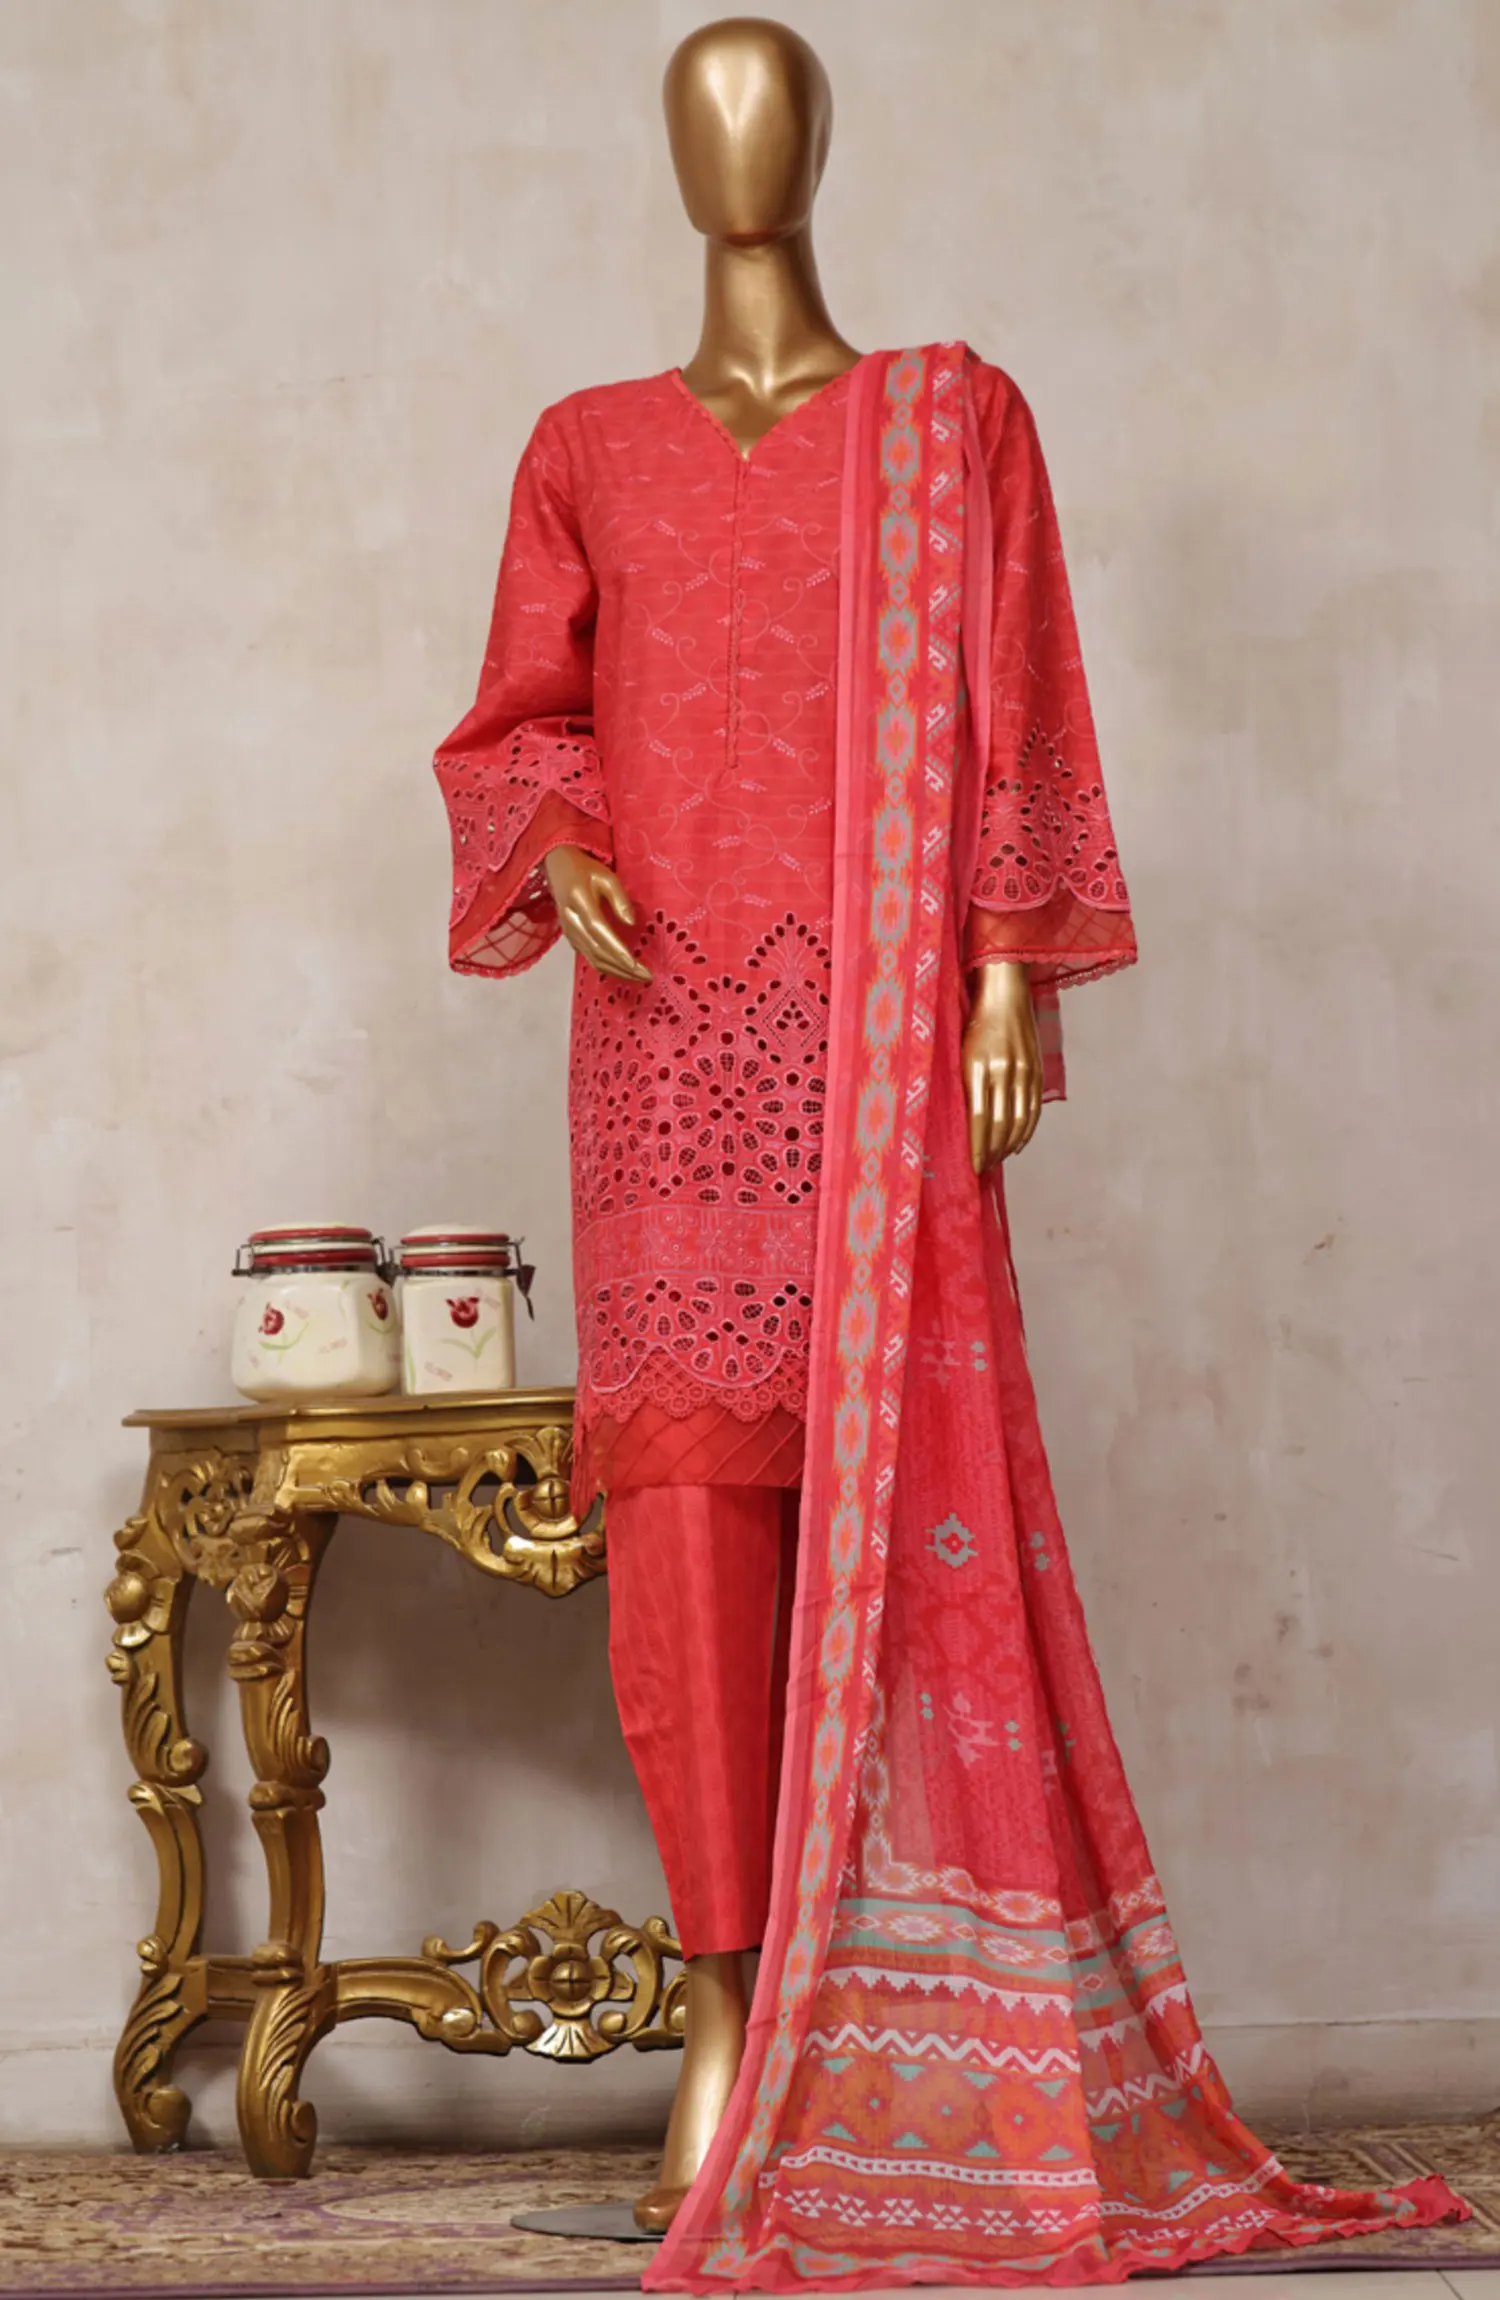 Bin Saeed Festive Embroidered Lawn Collection - BSFELC 01